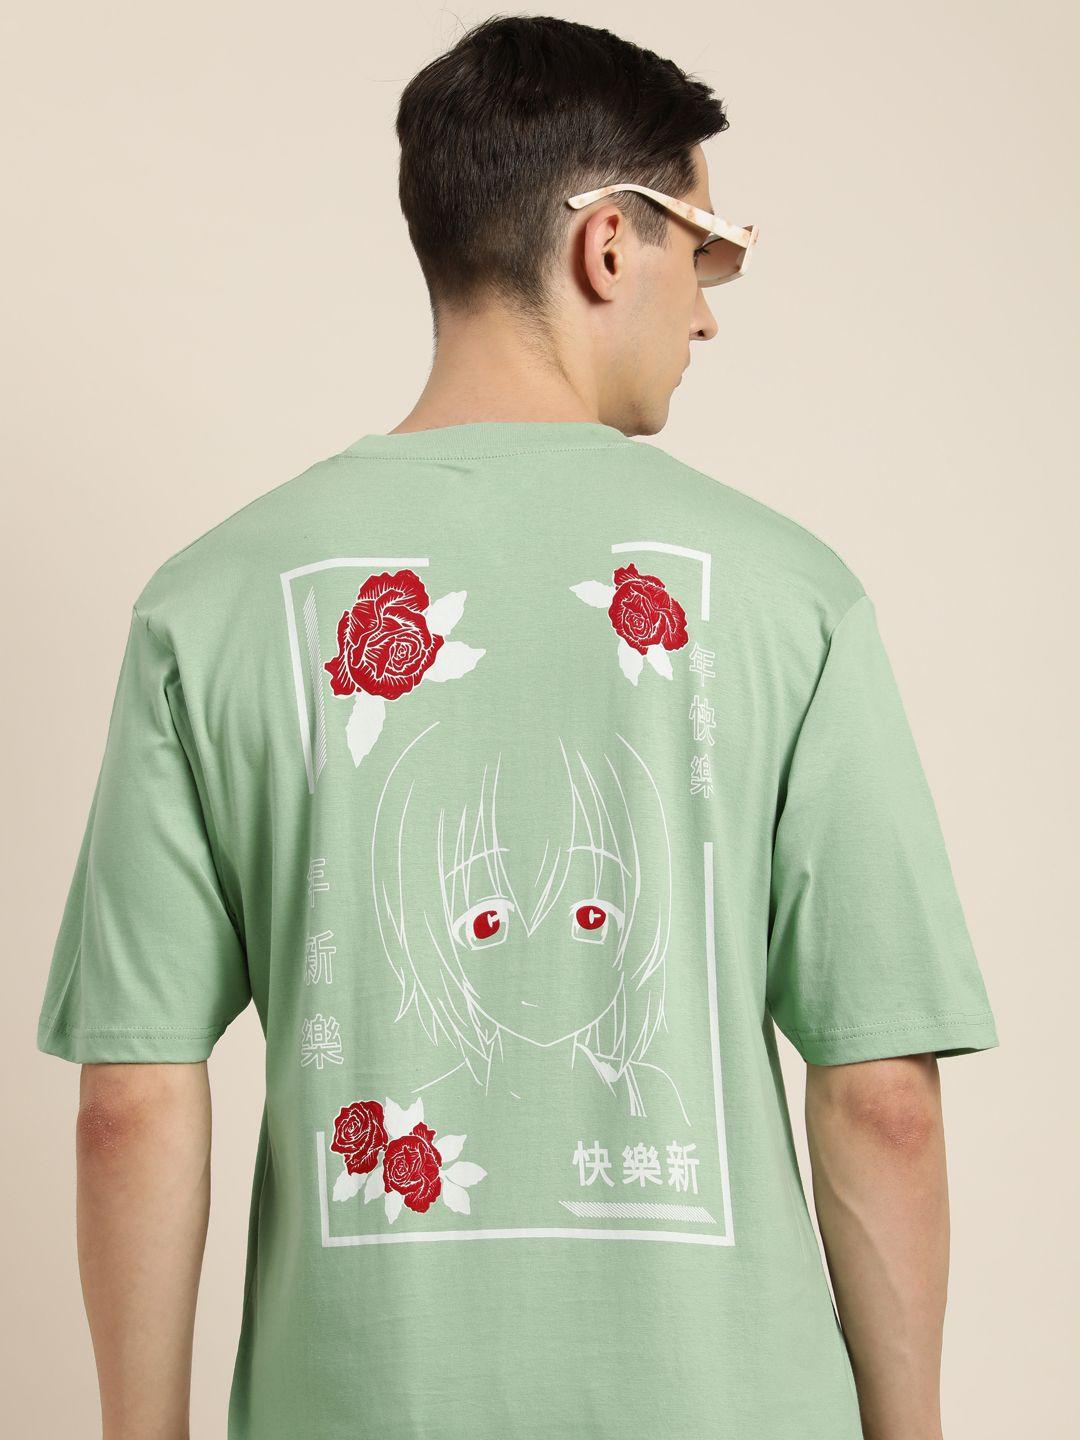 difference-of-opinion-men-mint-green-&-white-back-graphic-print-oversized-cotton-t-shirt